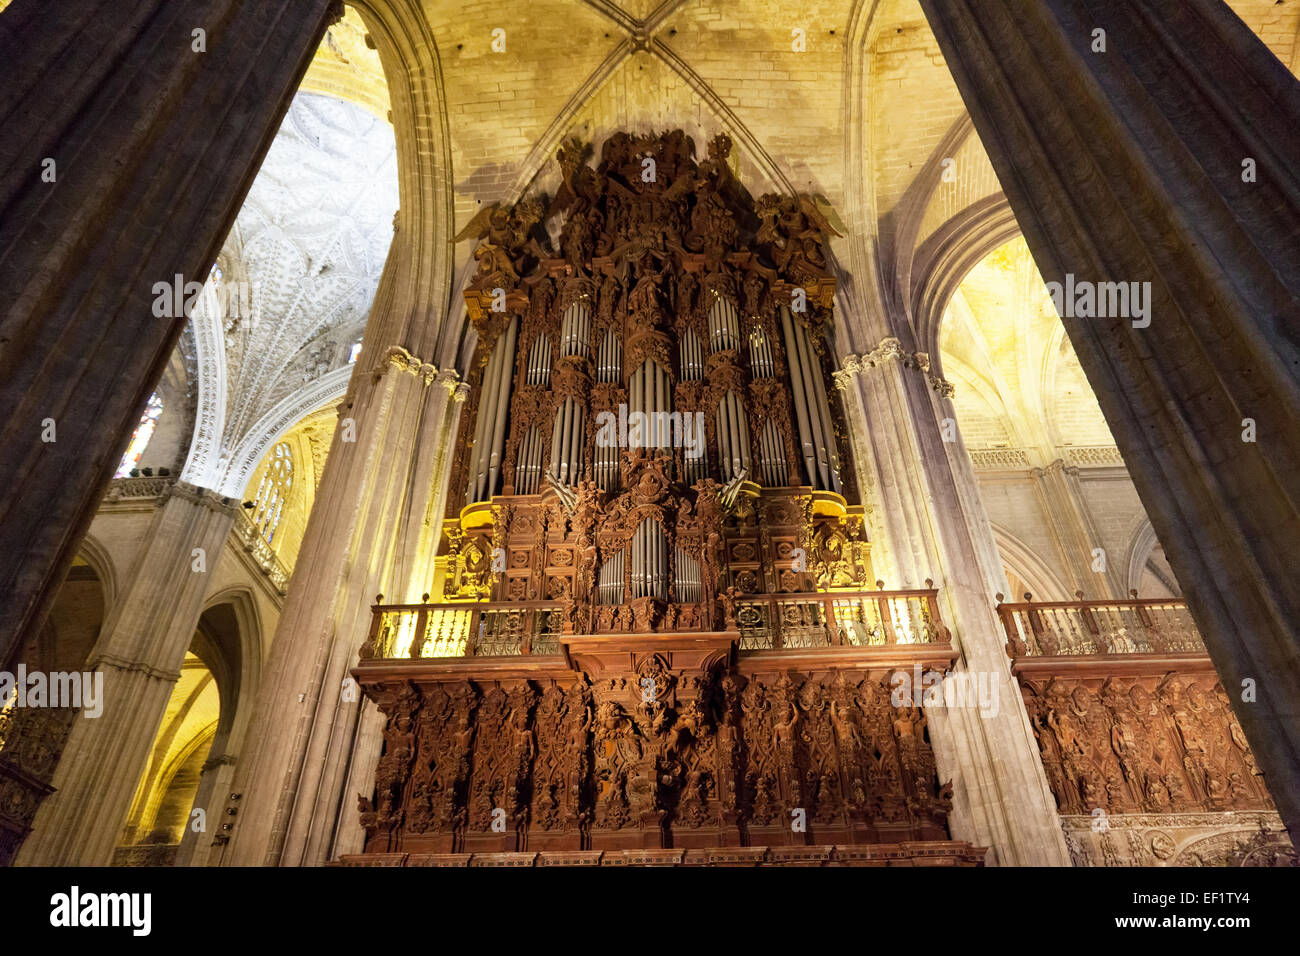 Ancient pipe organ in a cathedral in Seville, Spain Stock Photo